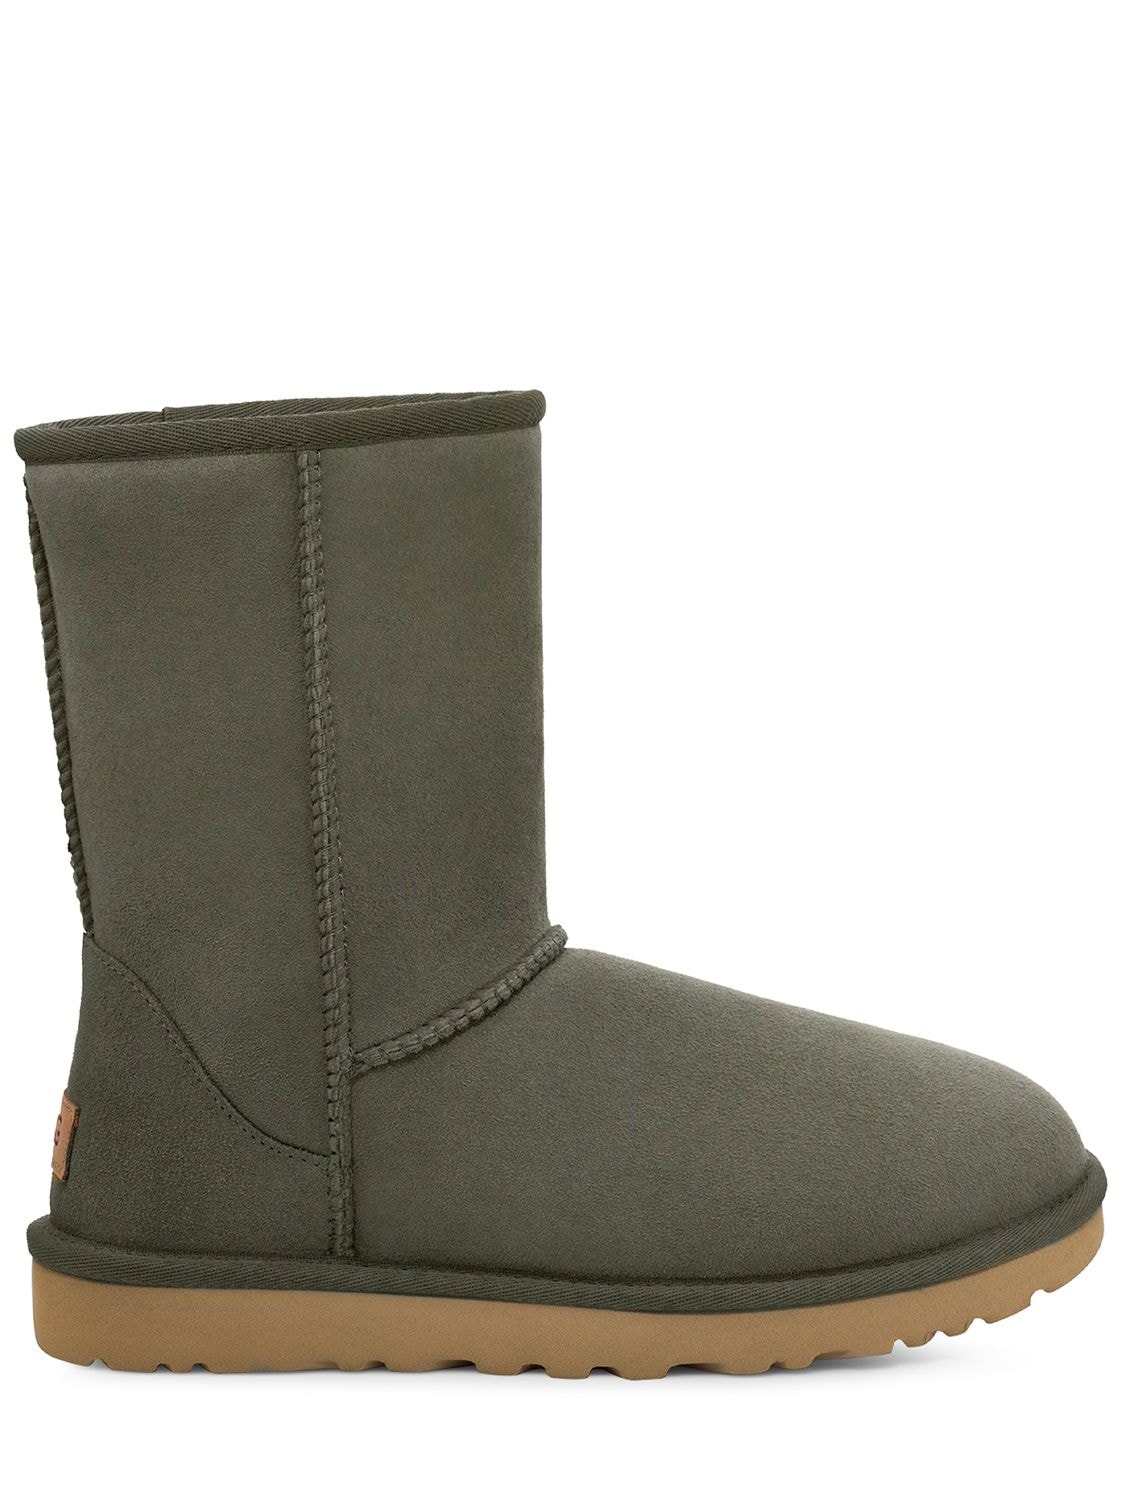 Ugg 10mm Classic Short Ii Shearling Boots In Military Green